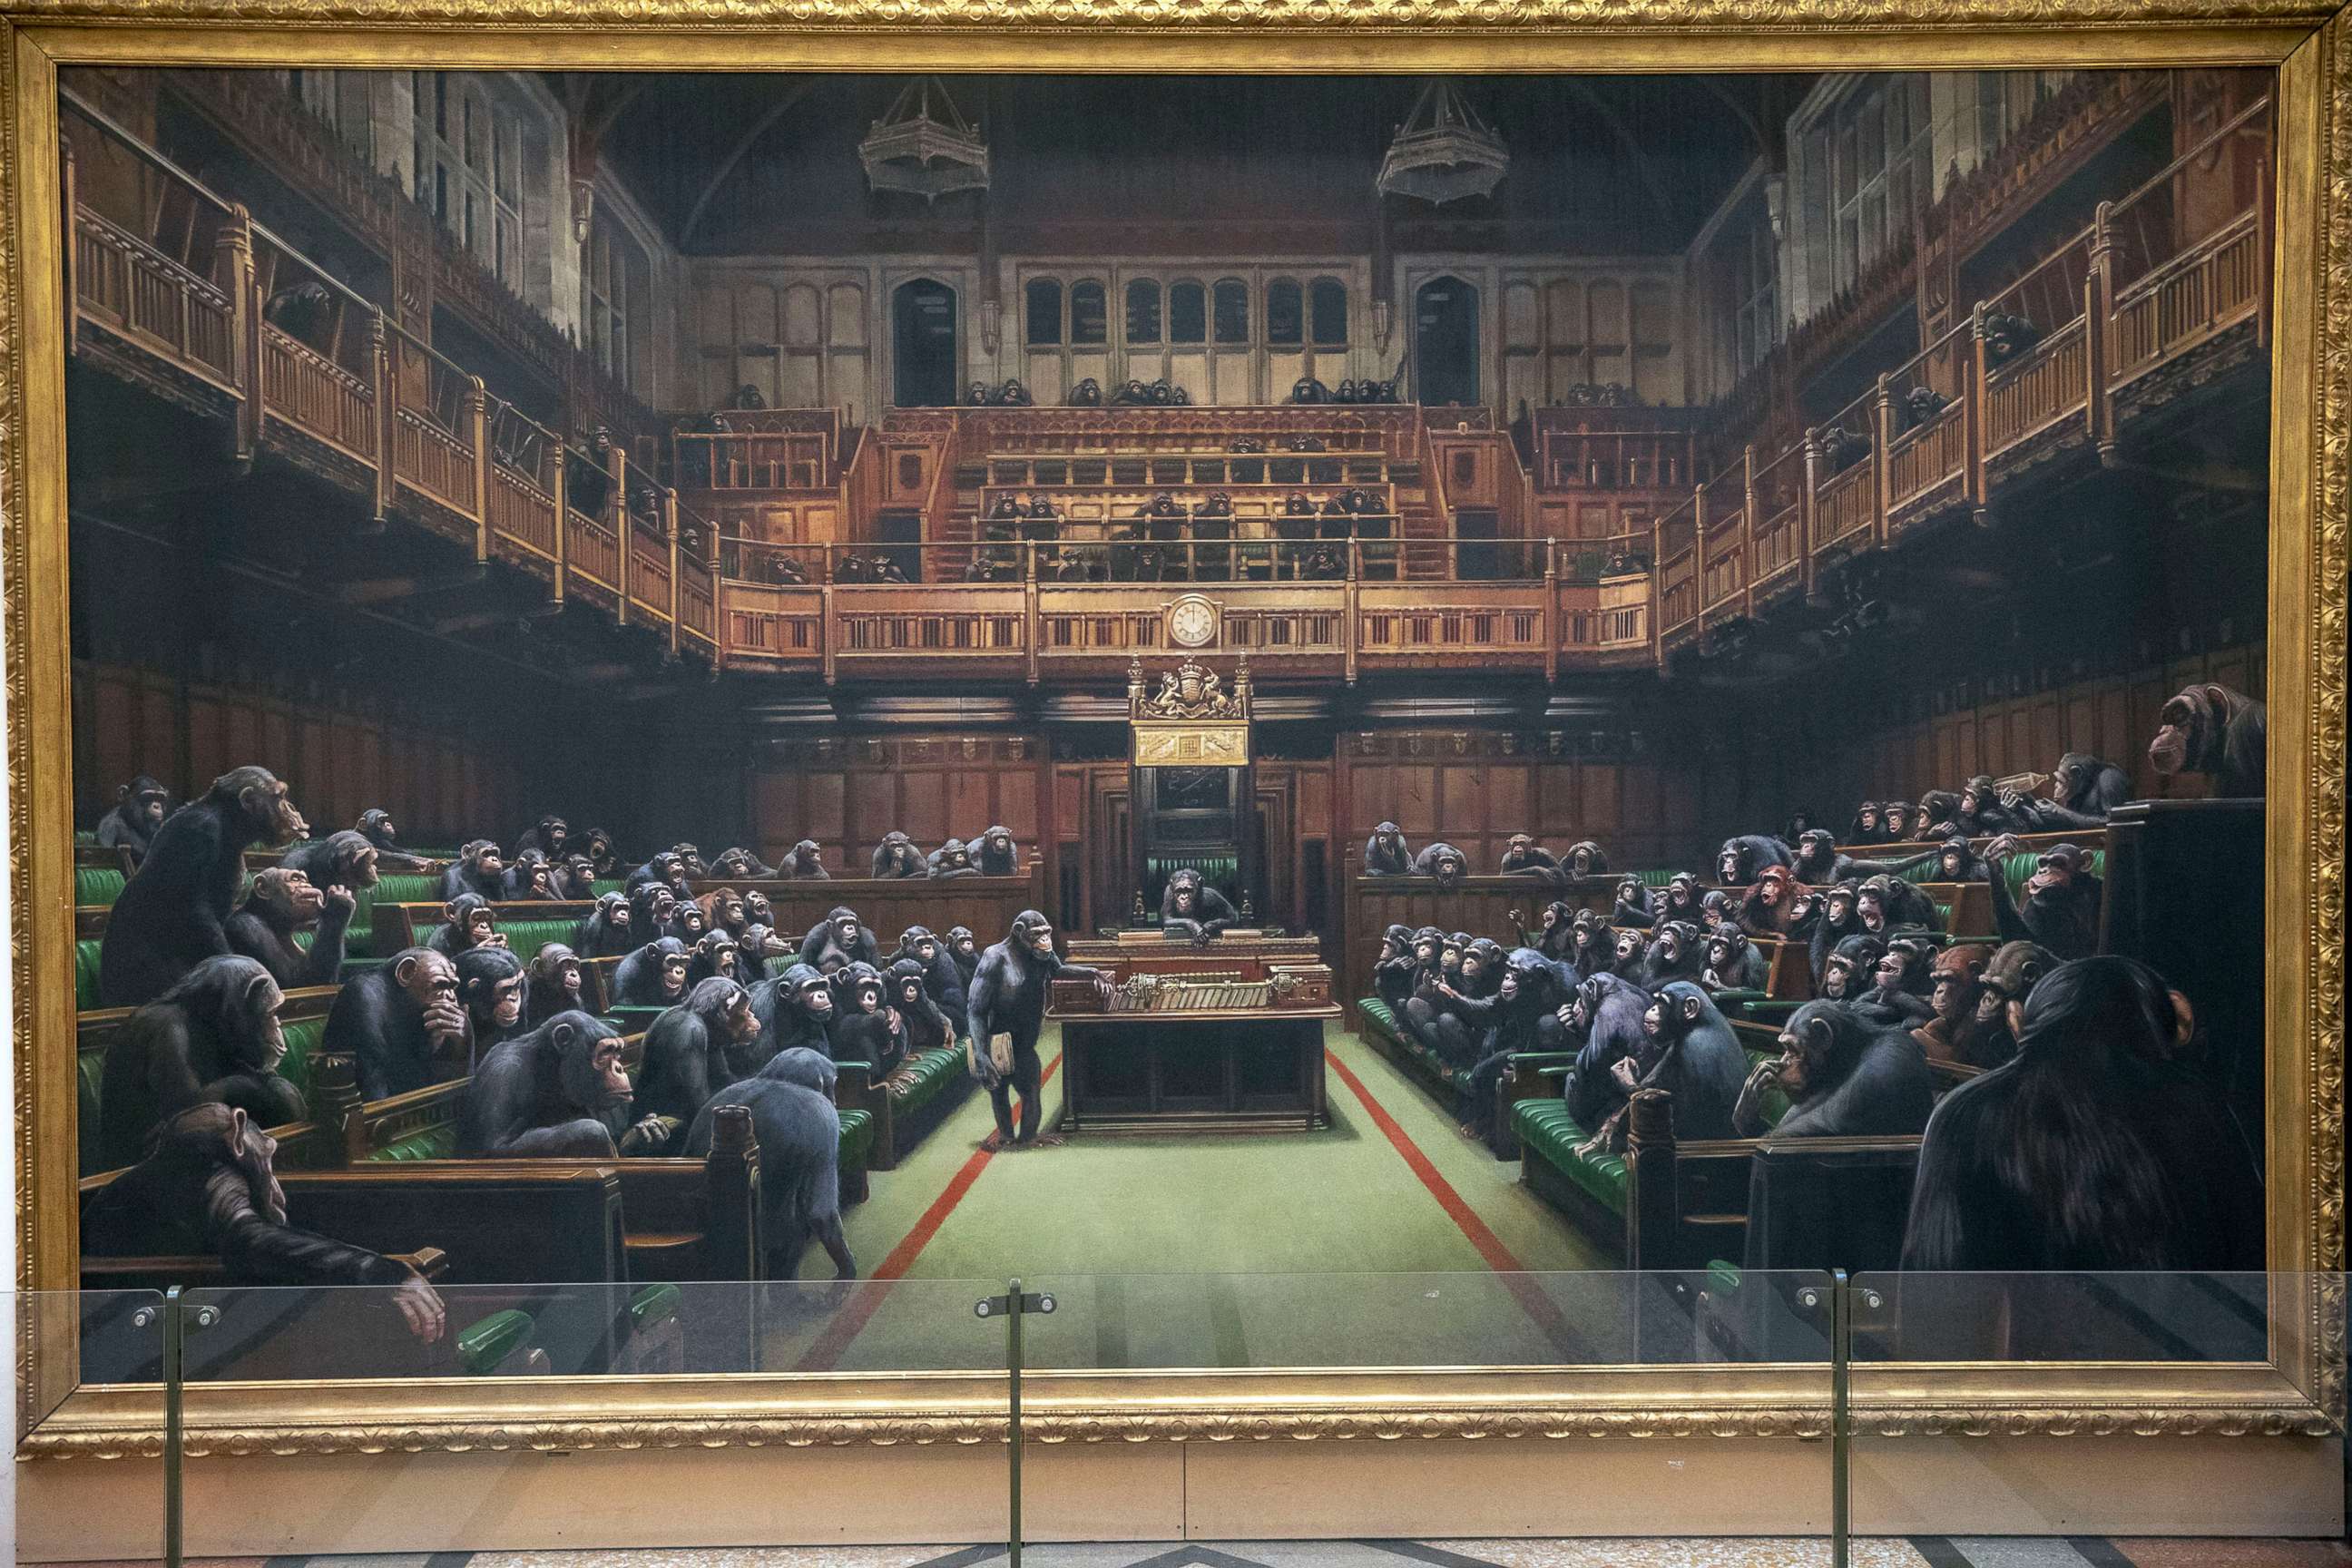 PHOTO: In this March 28, 2019, file photo, the painting 'Devolved Parliament' by the graffiti artist Banksy, is shown.